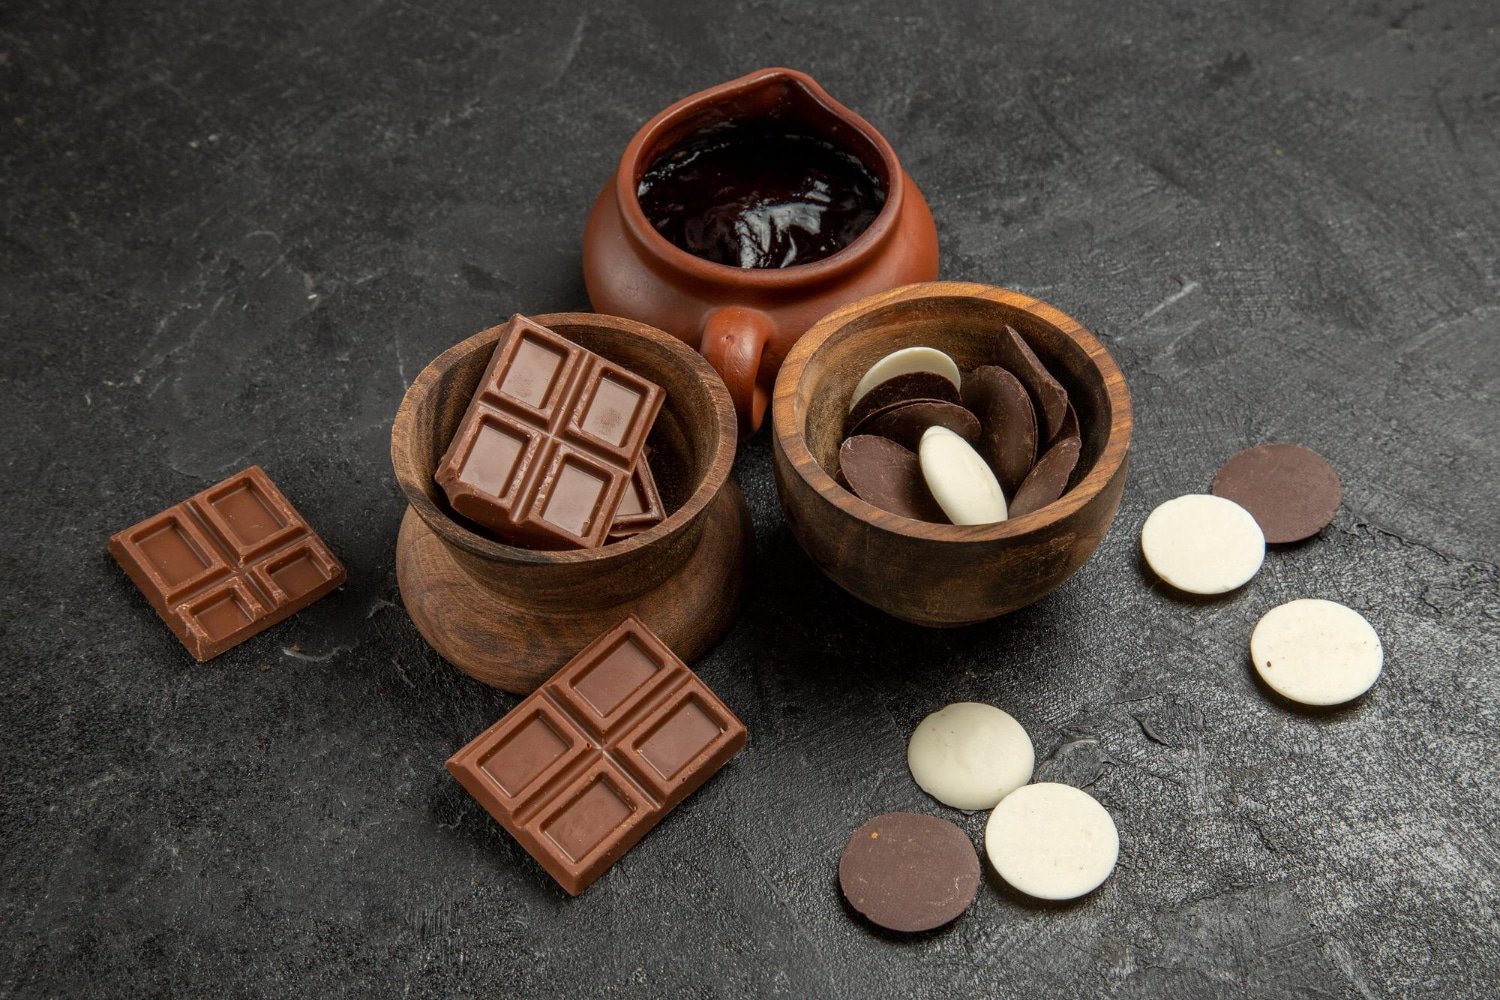 You are currently viewing Compartés Artisanal Chocolate with a Modern Twist